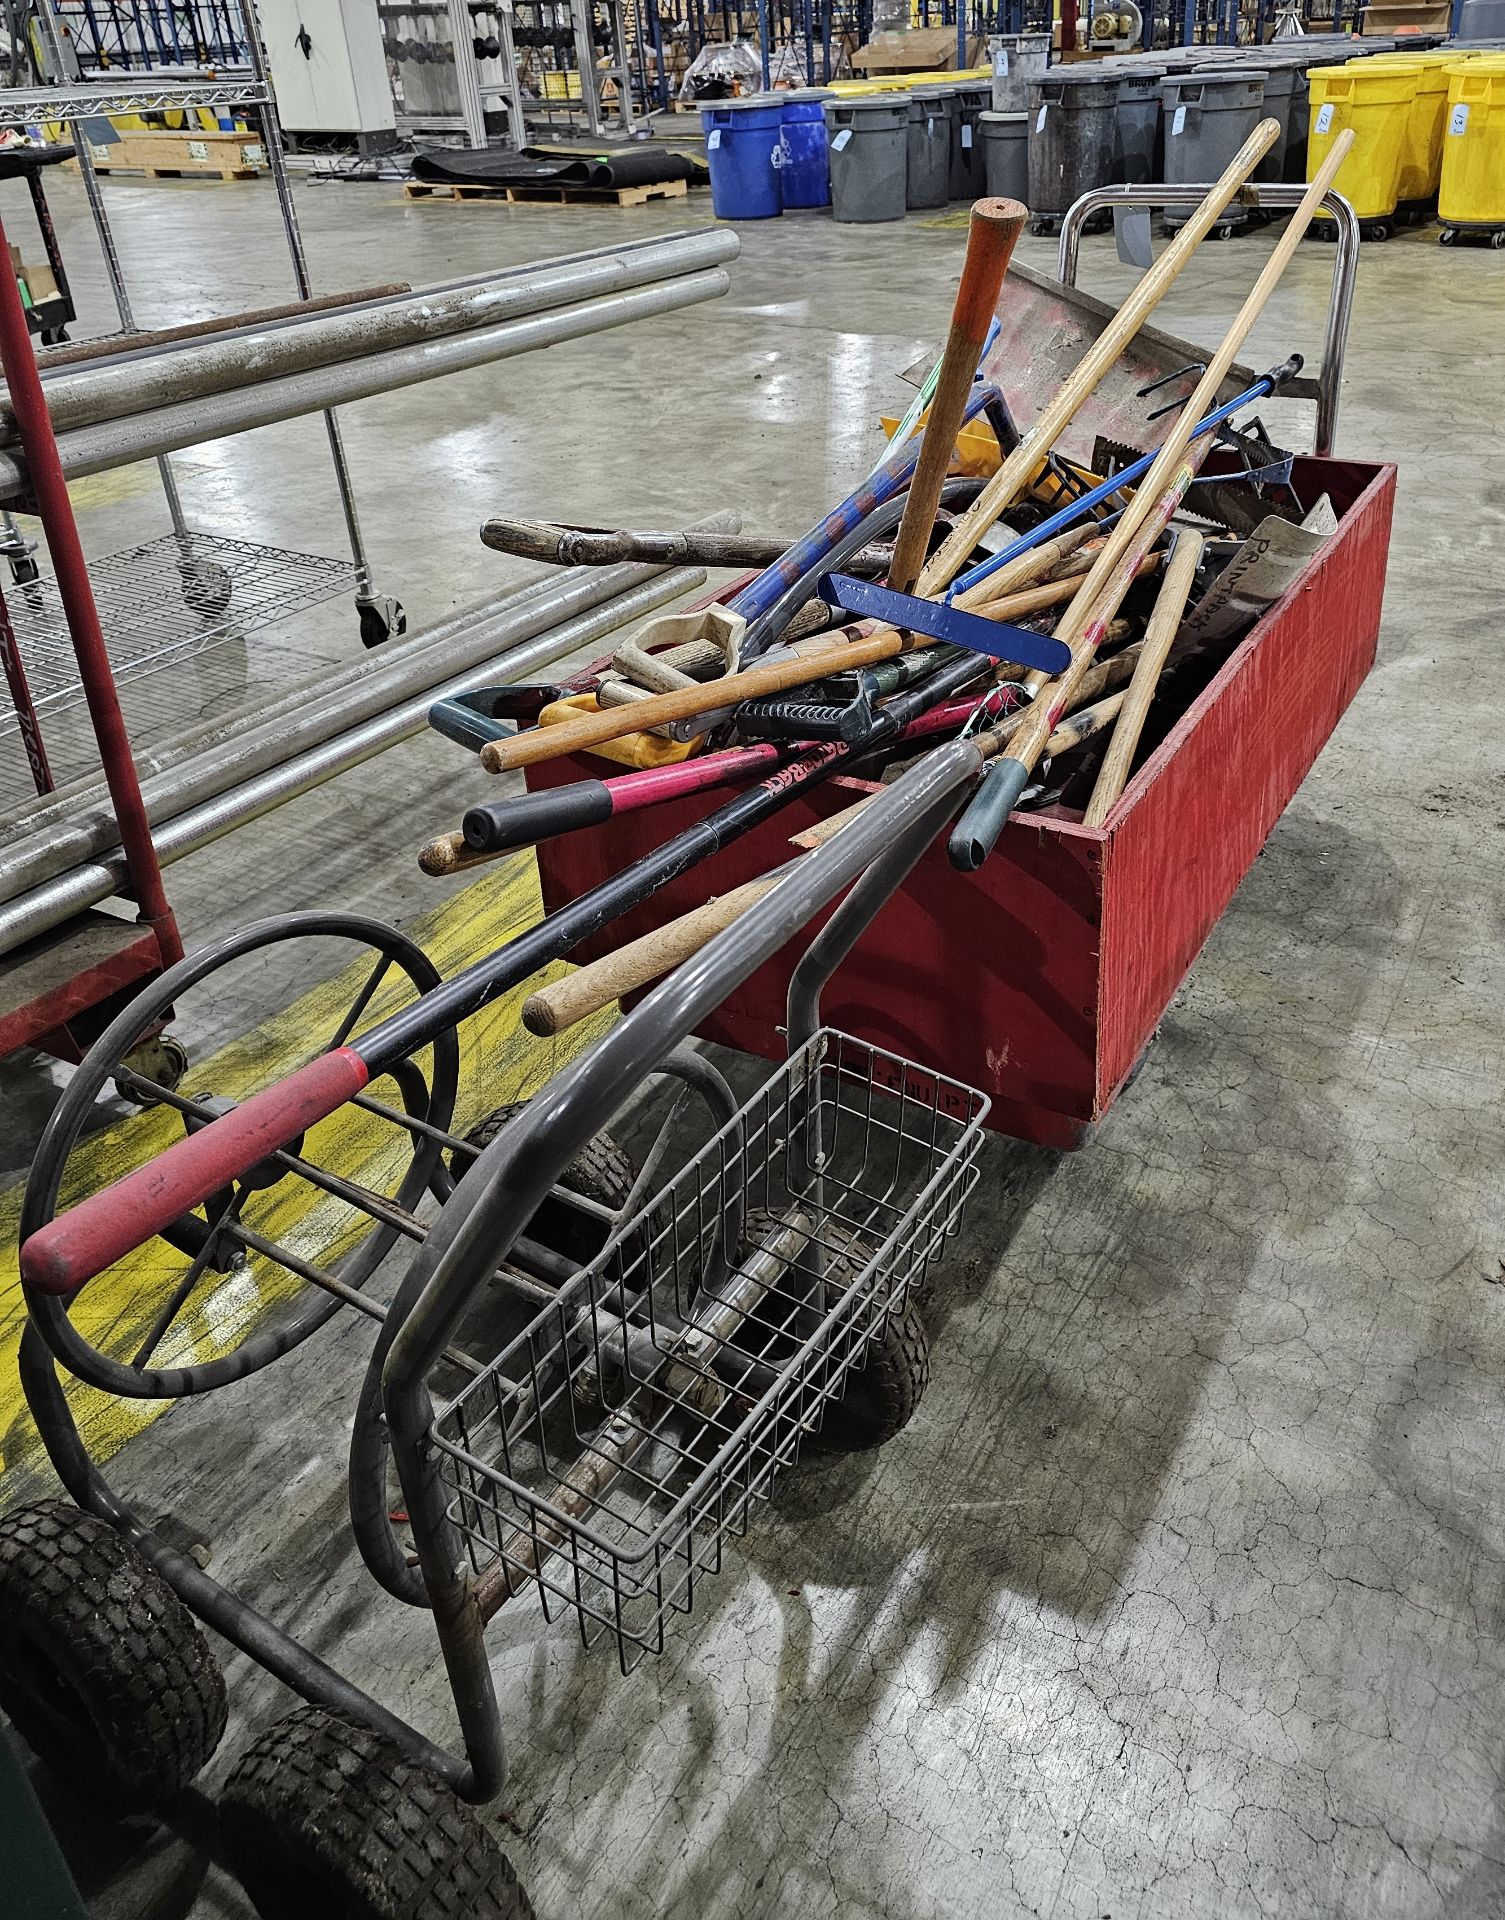 Carts with Outdoor Tools and Hose Reel - Image 5 of 5